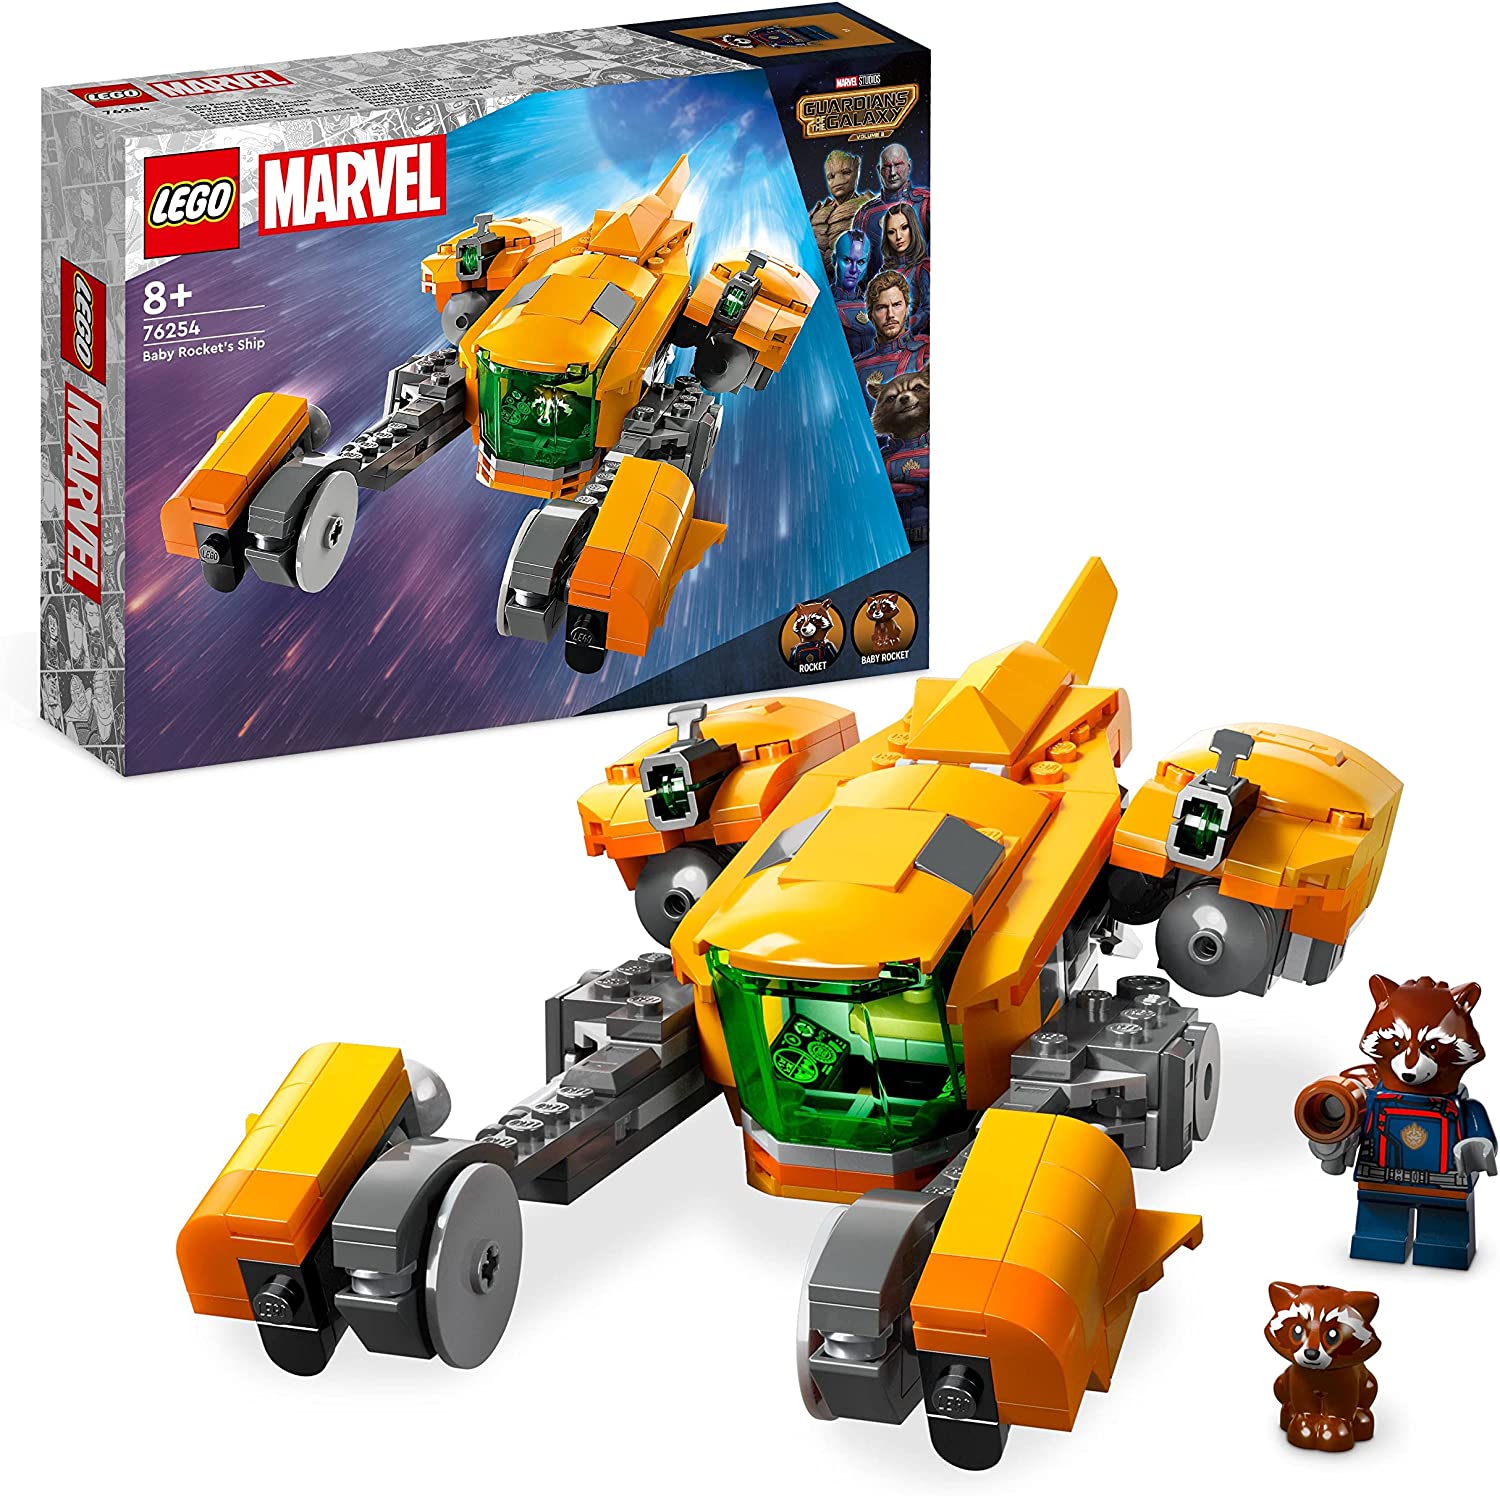 LEGO 76254 Marvel Baby Rockets Ship, Guardians of the Galaxy Volume 3 Build Toy for Kids with Superhero Mini Figure and Spaceship, Space Set